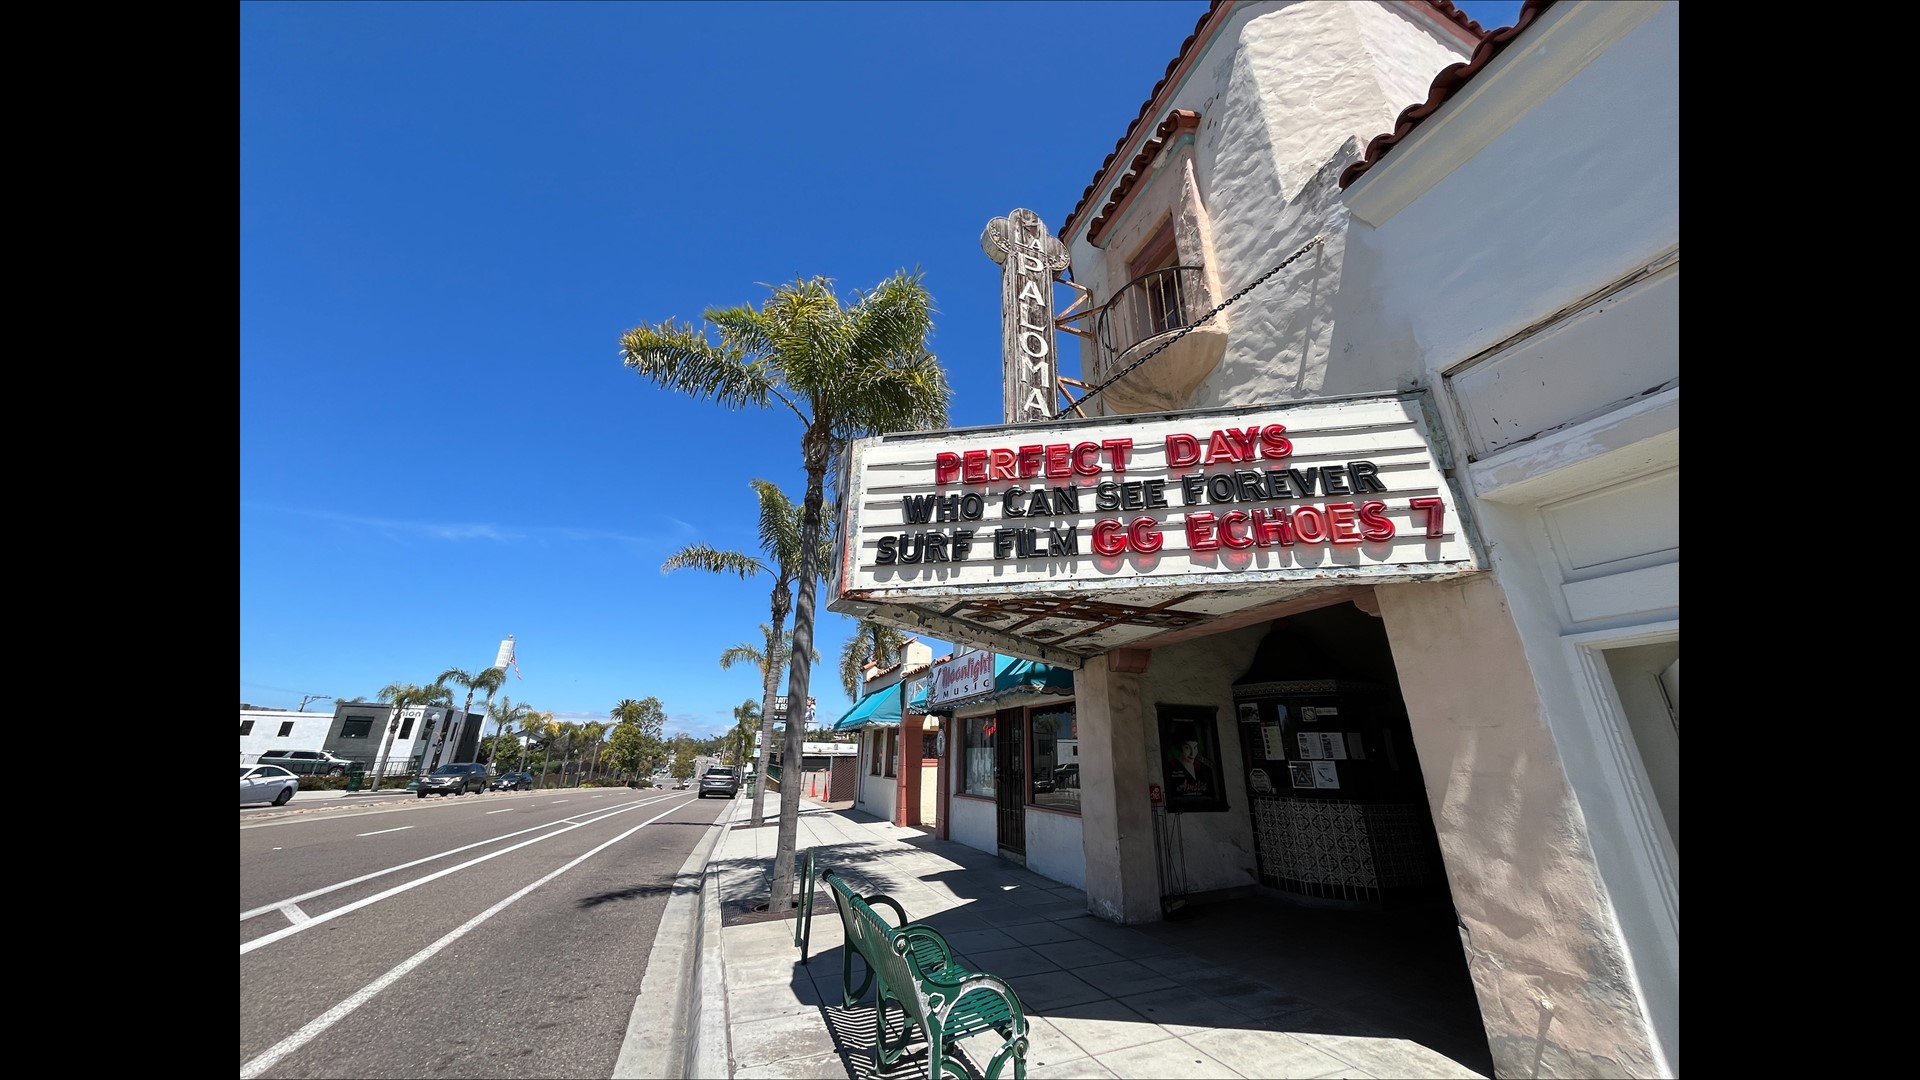 CBS 8 is profiling San Diego County's most iconic businesses and the original Encinitas theater makes the marquee.